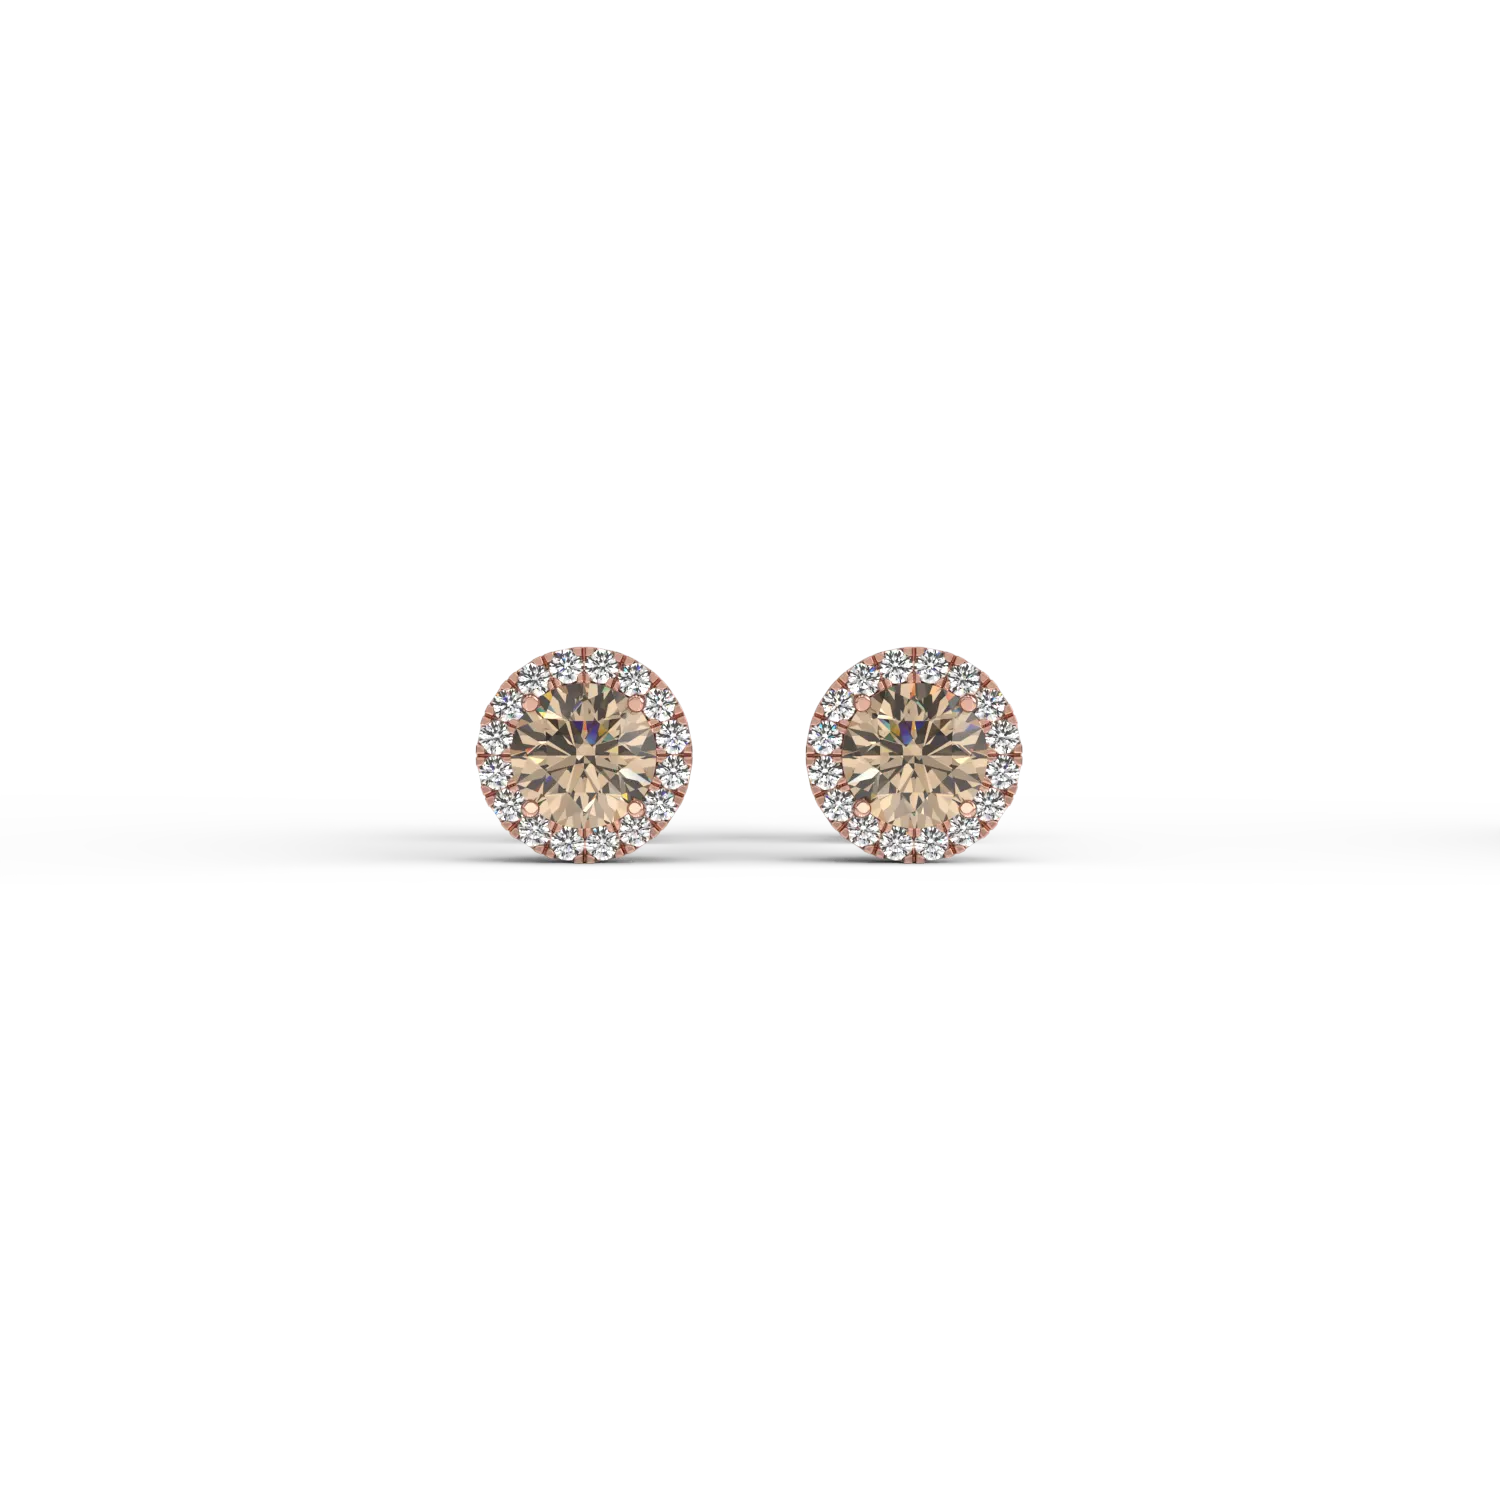 18K rose gold earrings with 0.61ct brown diamonds and 0.11ct diamonds